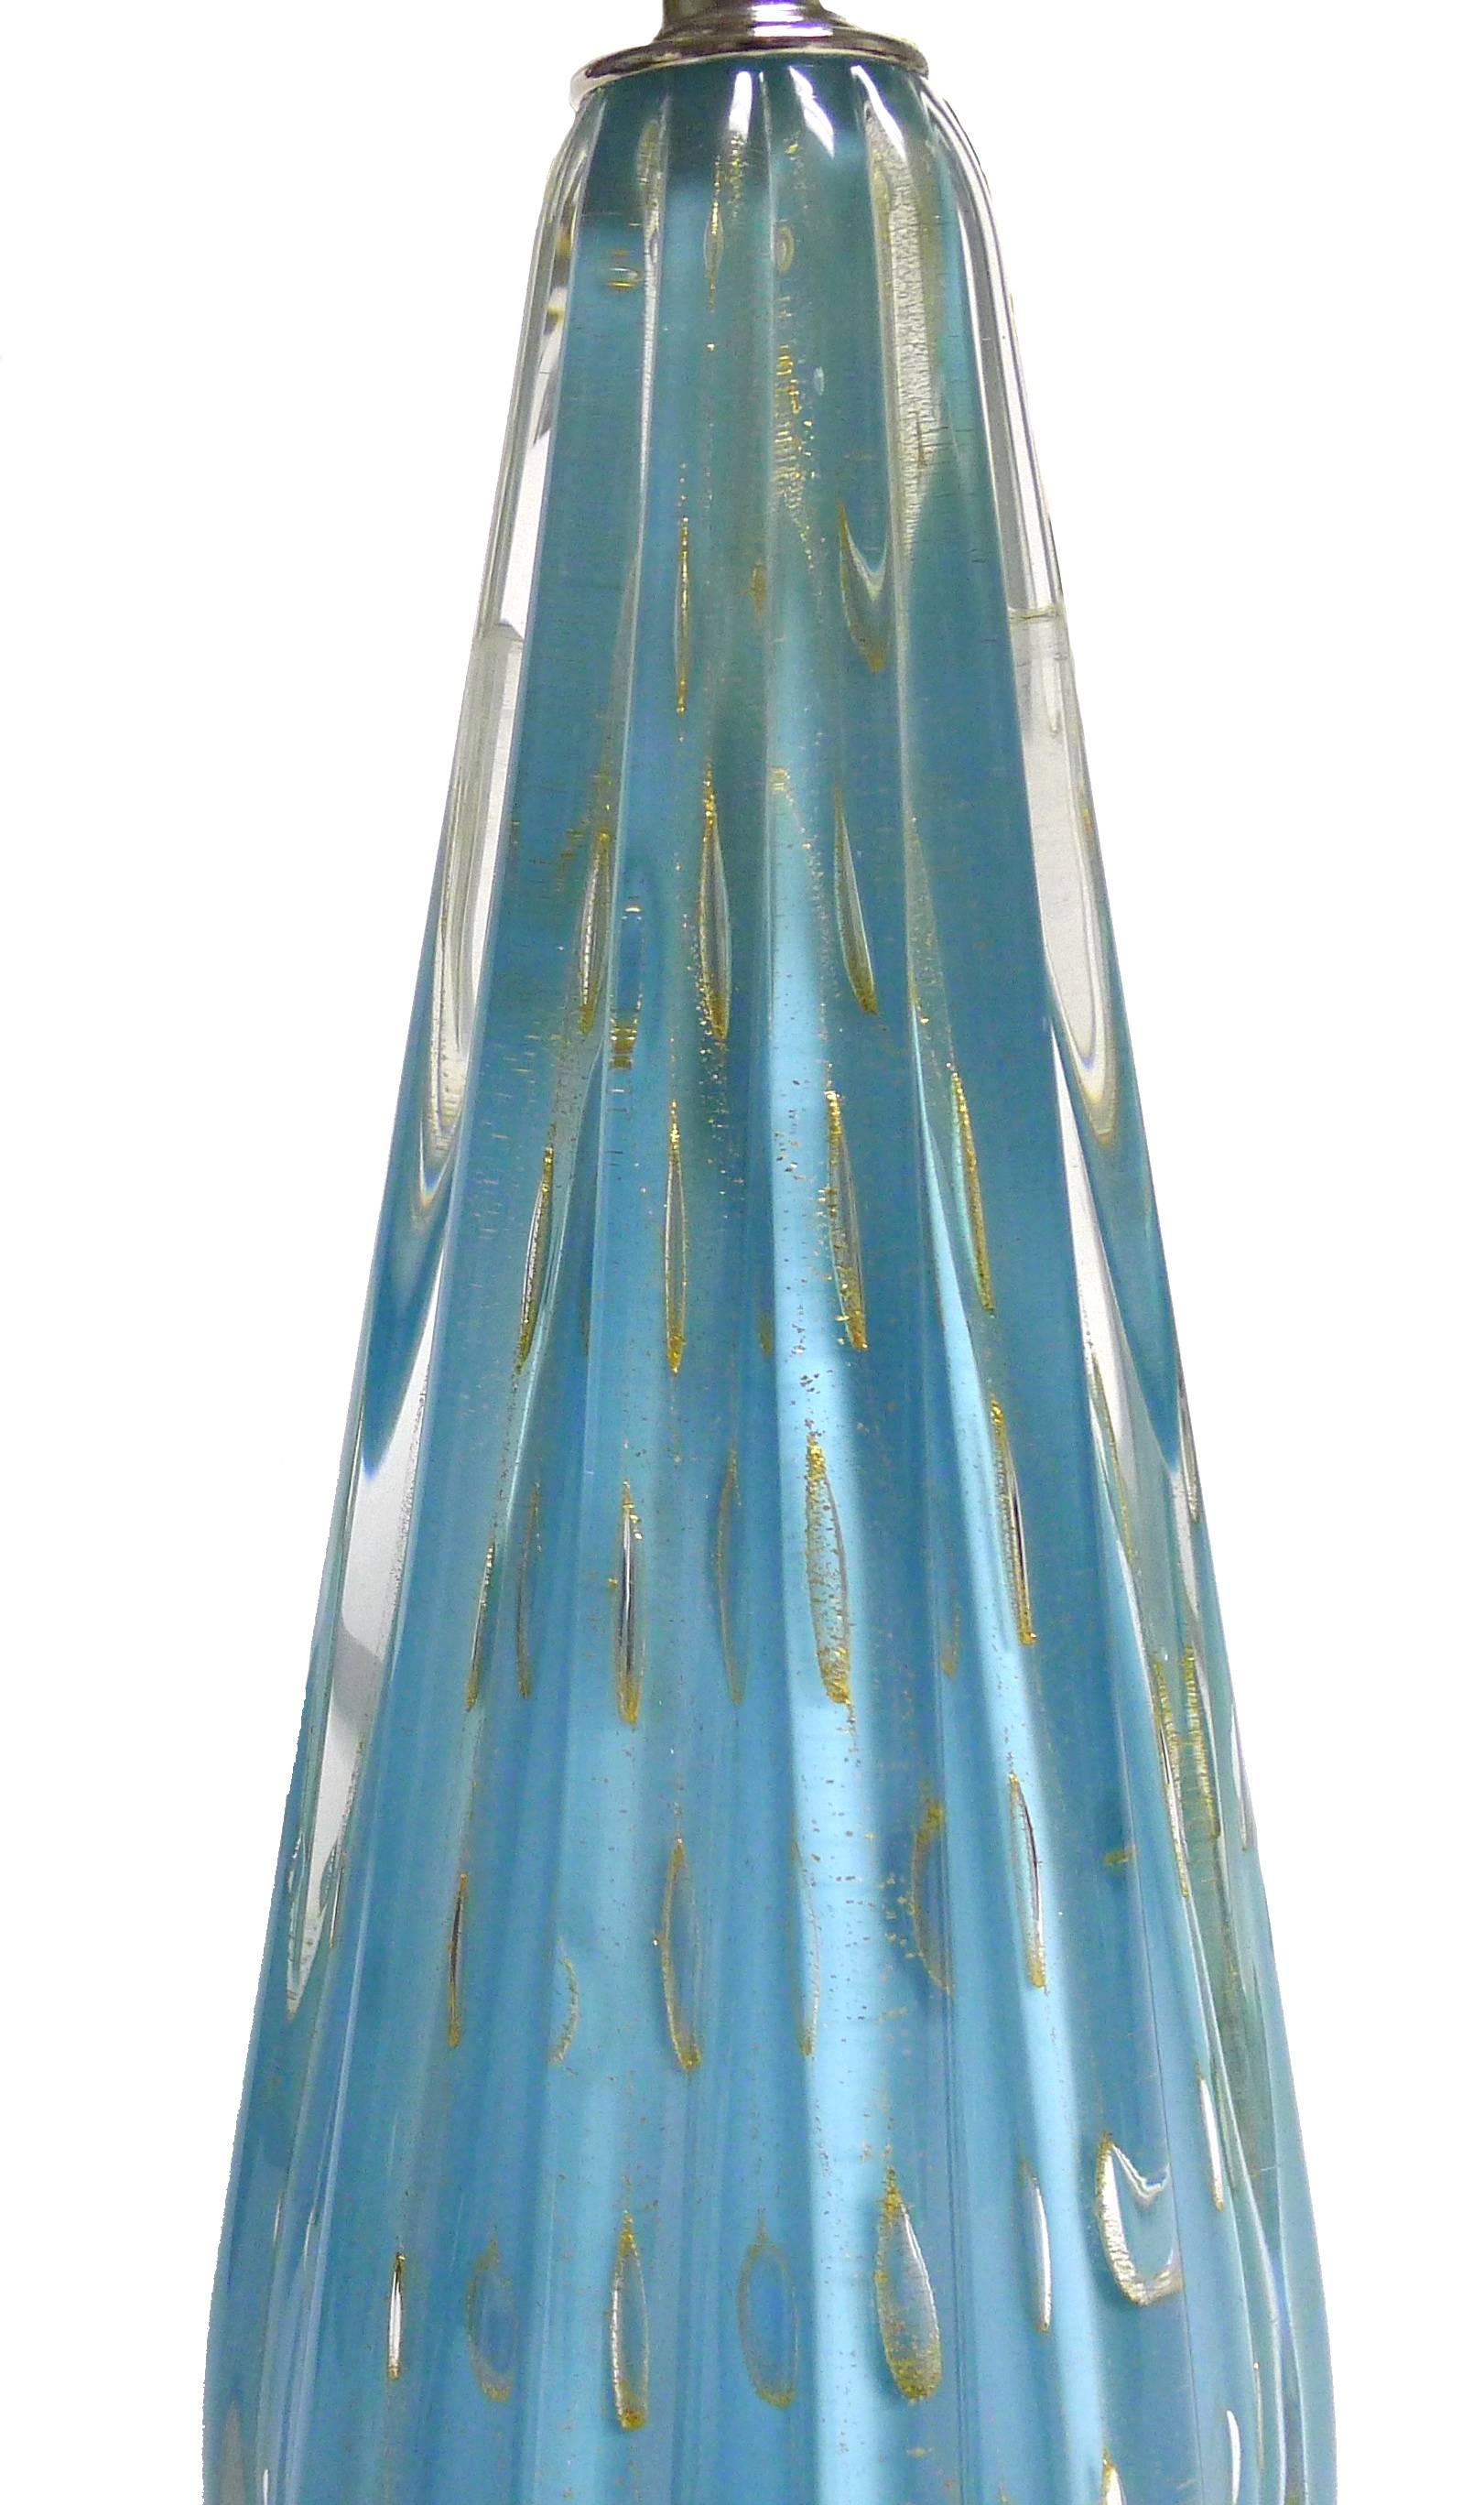 1960s Murano glass lamp by Barbini. Robin's egg blue bullicante (controlled bubbles) glass with gold flecks throughout. New Lucite base. Newly rewired, takes one standard bulb. Lampshade is not included.